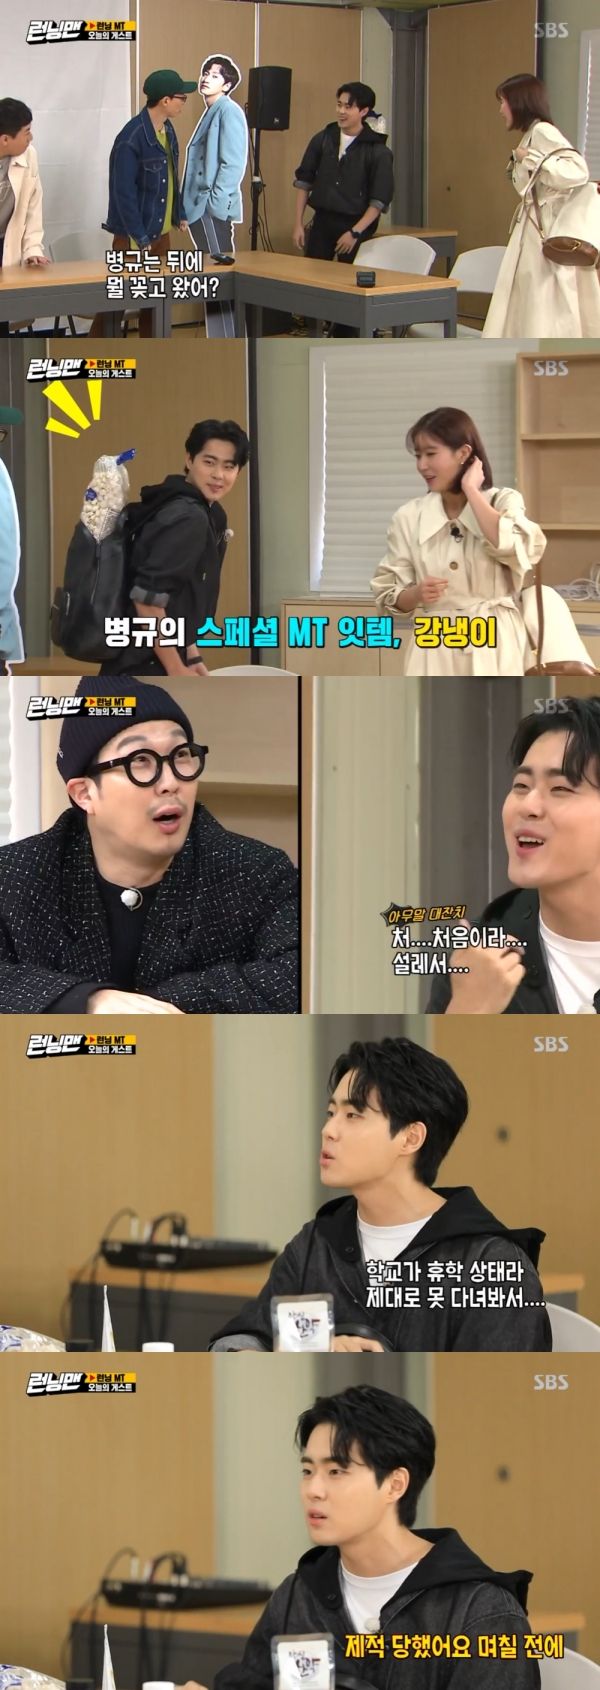 Jo Byung-gyu introduced MT preparatoryOn SBS Running Man broadcast on the 15th, guest Jo Byung-gyu revealed MT preparatory and said, It is exciting.On the show, Jo Byung-gyu joined the Running Man MT; Kim Jong-guk welcomed Jo Byung-gyu as a motivation for the gym.Jo Byung-gyu, who appeared with a cold snap, said, I brought eggs and medicines because of the MT concept. Just in case. Platycodon grandiflorus Juice.I was at home, Milk Sessle. I am getting some medicine because I have been pressed these days. I havent been to MT, said Haha, who was watching.Jo Byung-gyu said, I am excited for the first time. I have not been able to go to school properly because I am on school leave.(I) dropped out because I dropped out and dropped out, Yoo Jae-Suk said, adding that Jo Byung-gyu was injured by self-esteem.Haha laughed, saying, Ive never been hurt by self-esteem. I do not know anything.